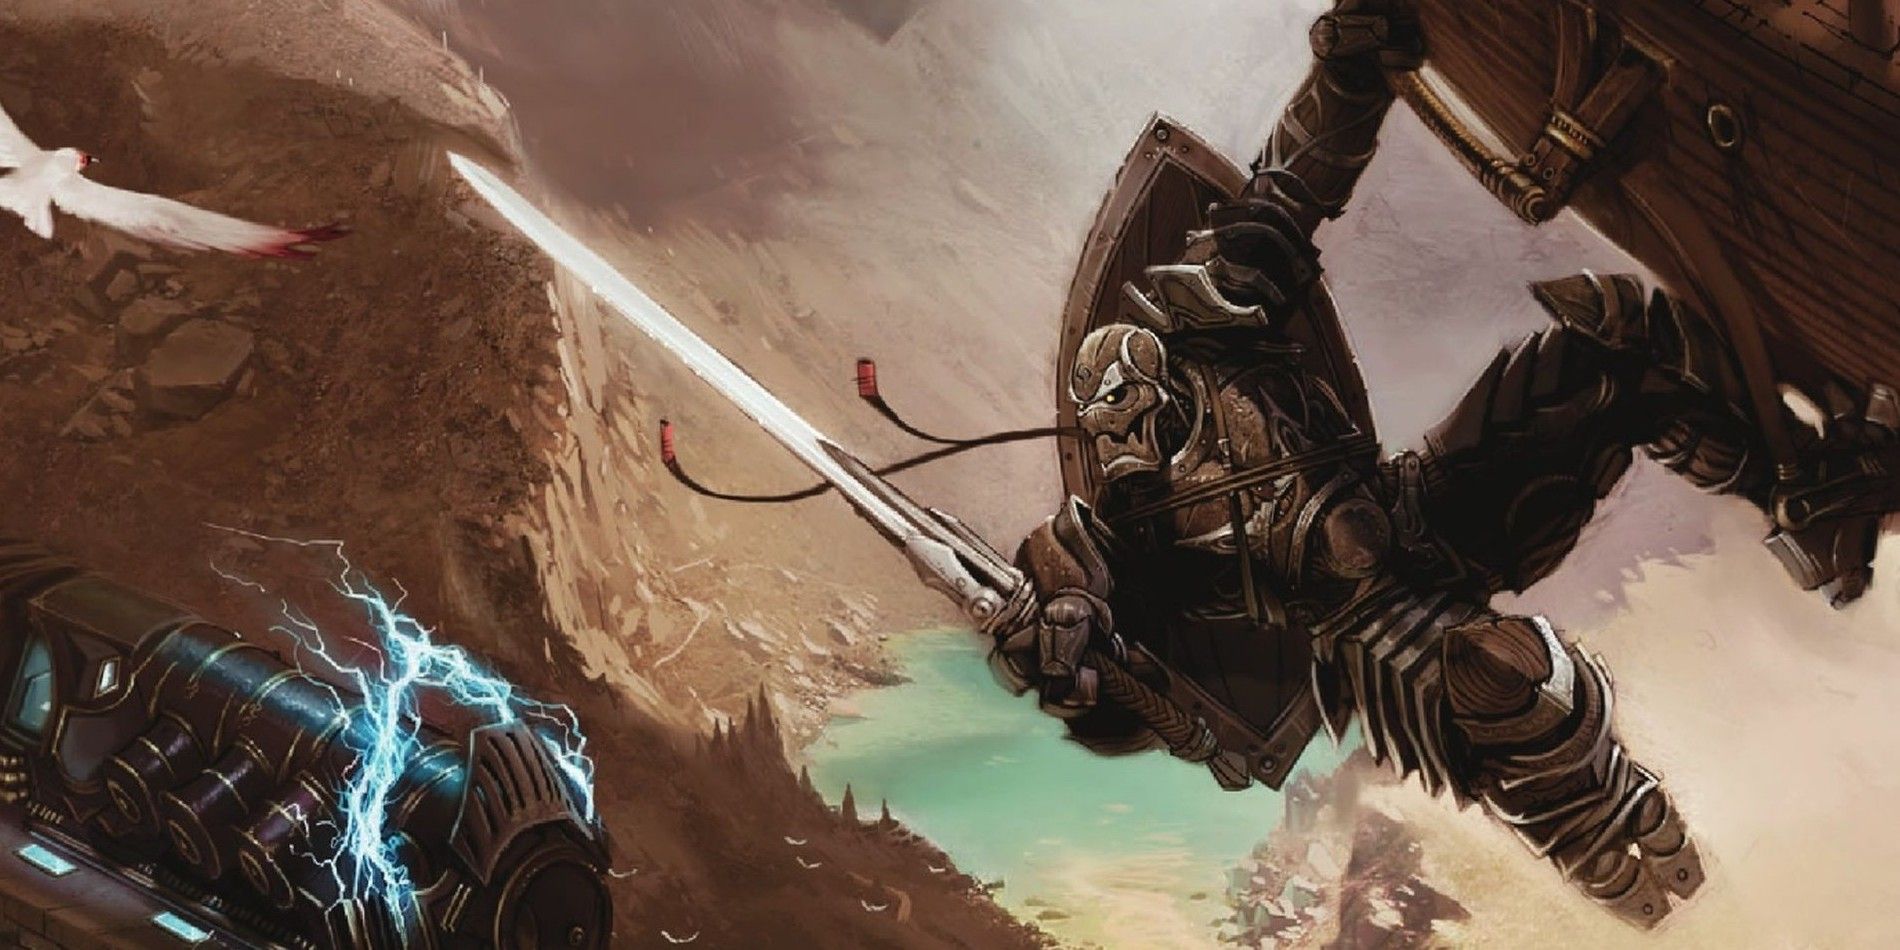 Interior art from the DnD Eberron book featuring a Warforged hero preparing to board the Ligthning Rail.